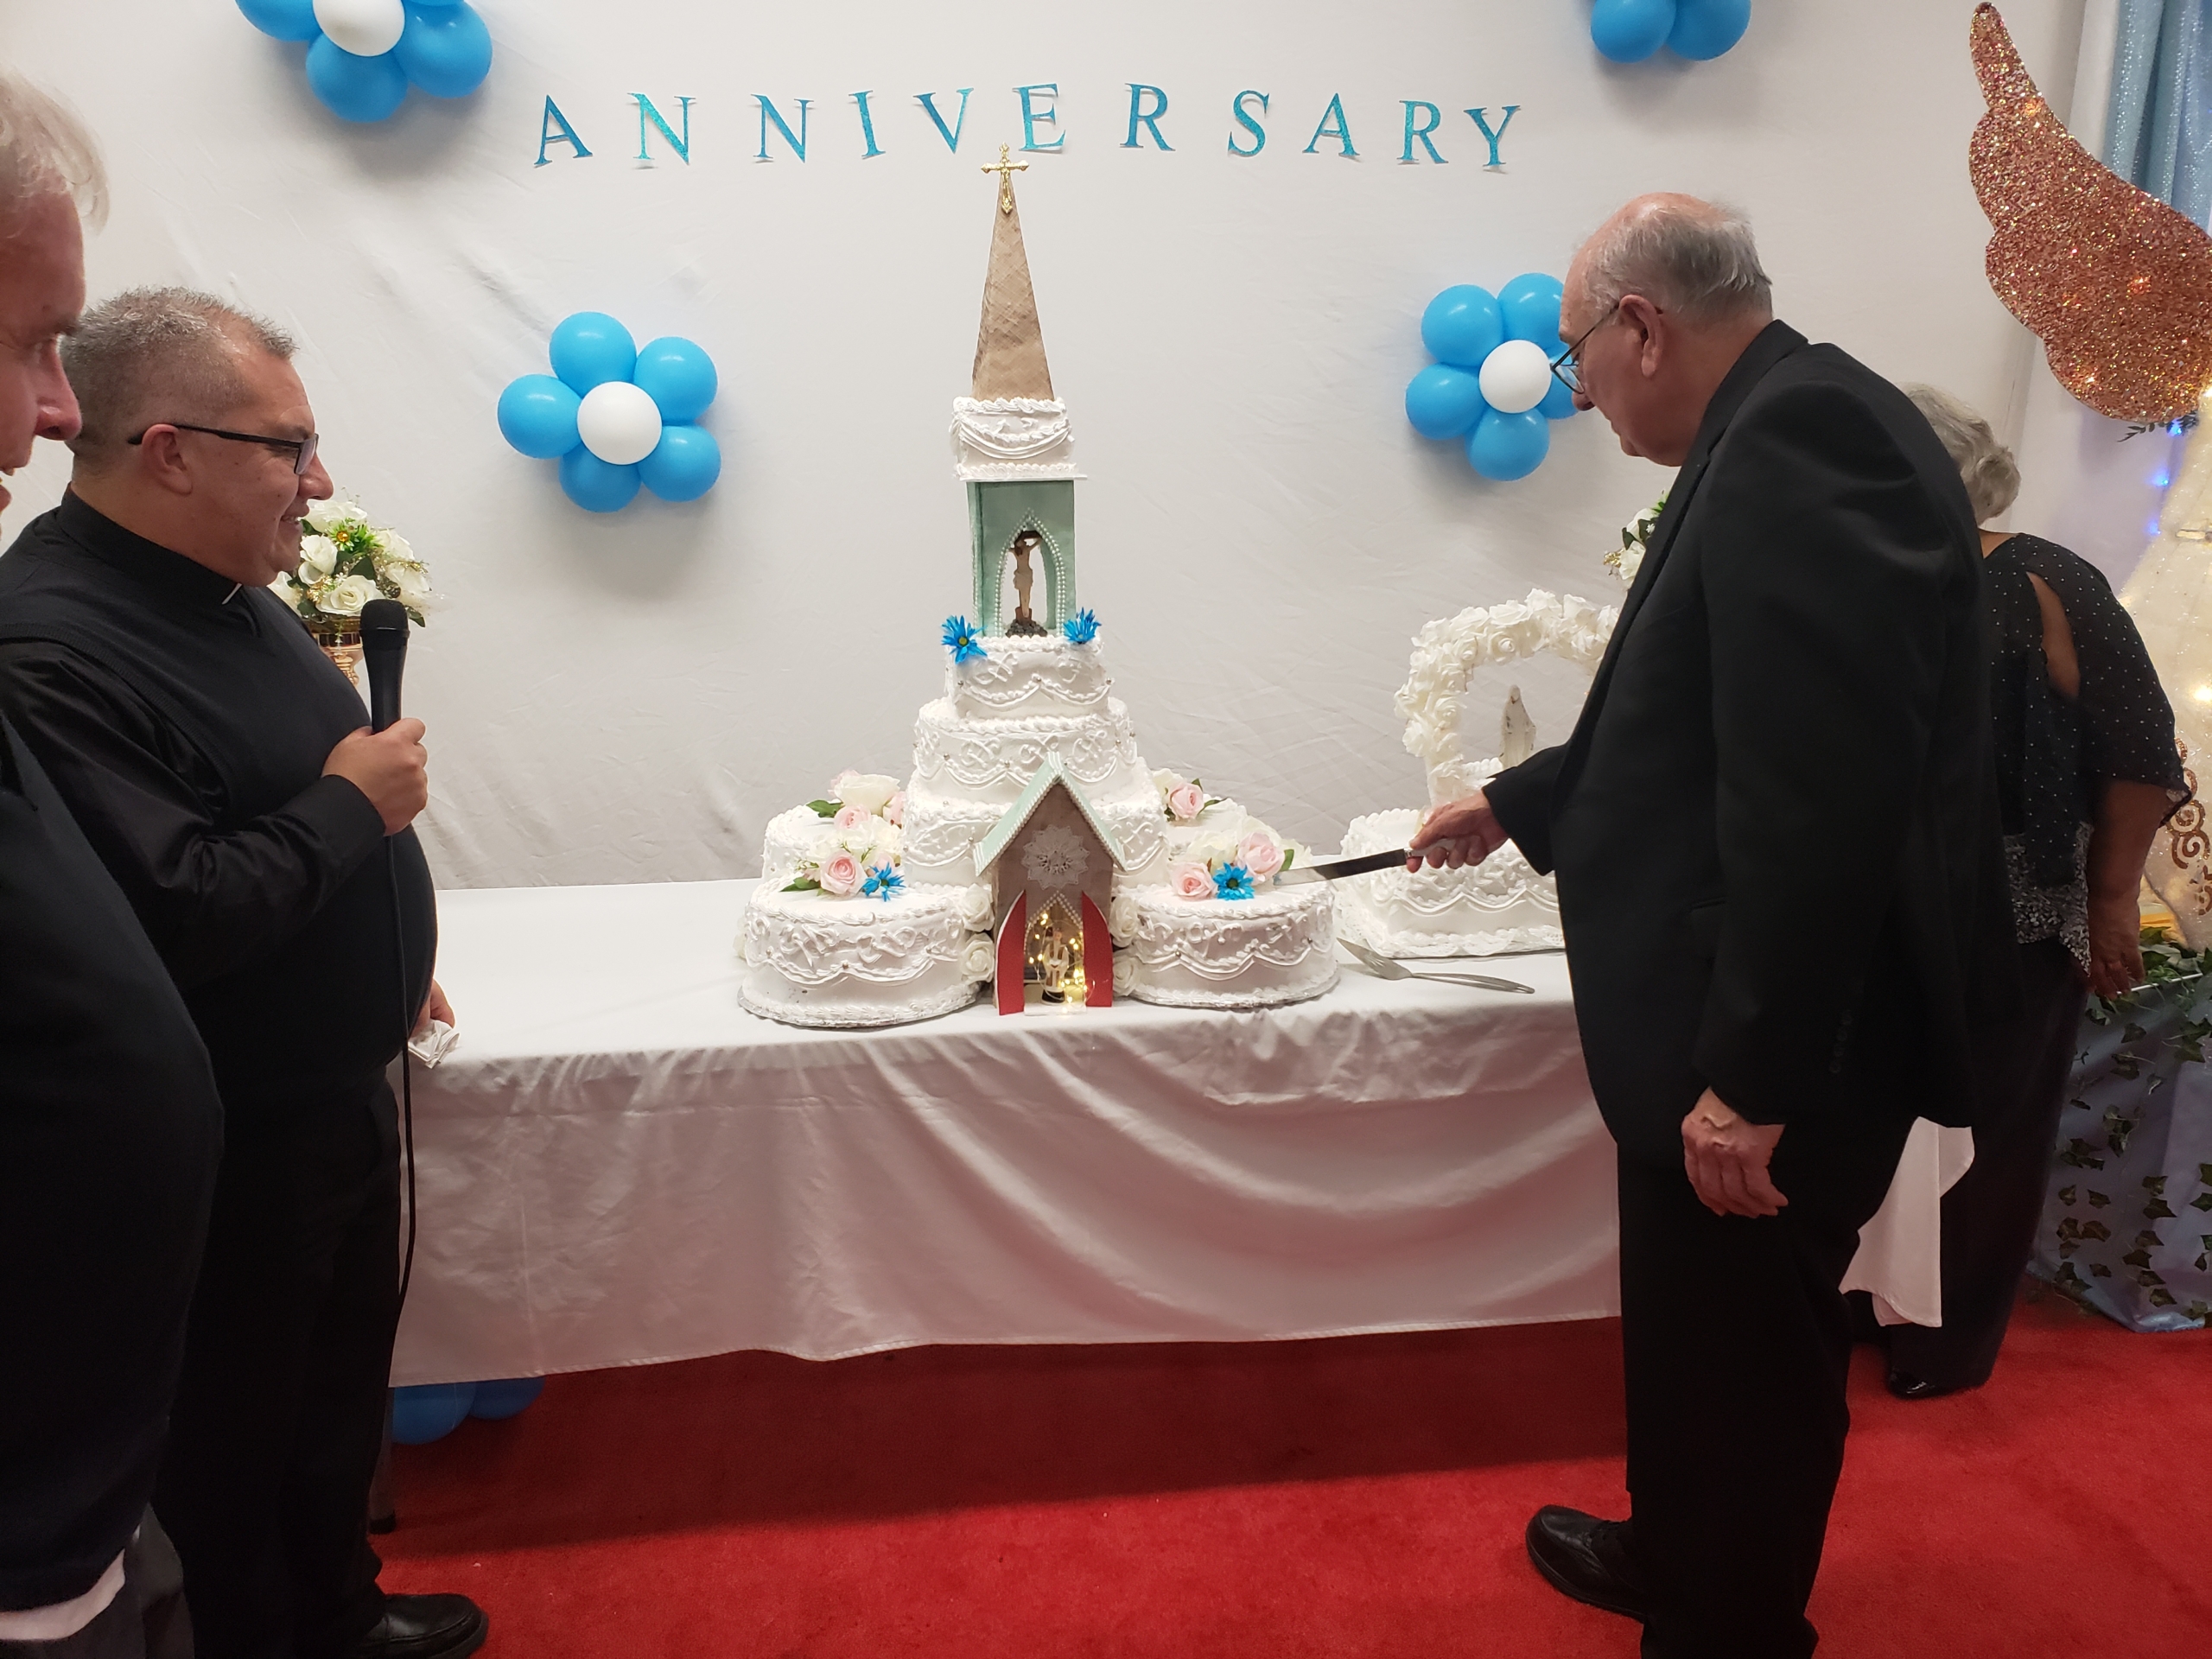 A couple of people standing in front of a cake.